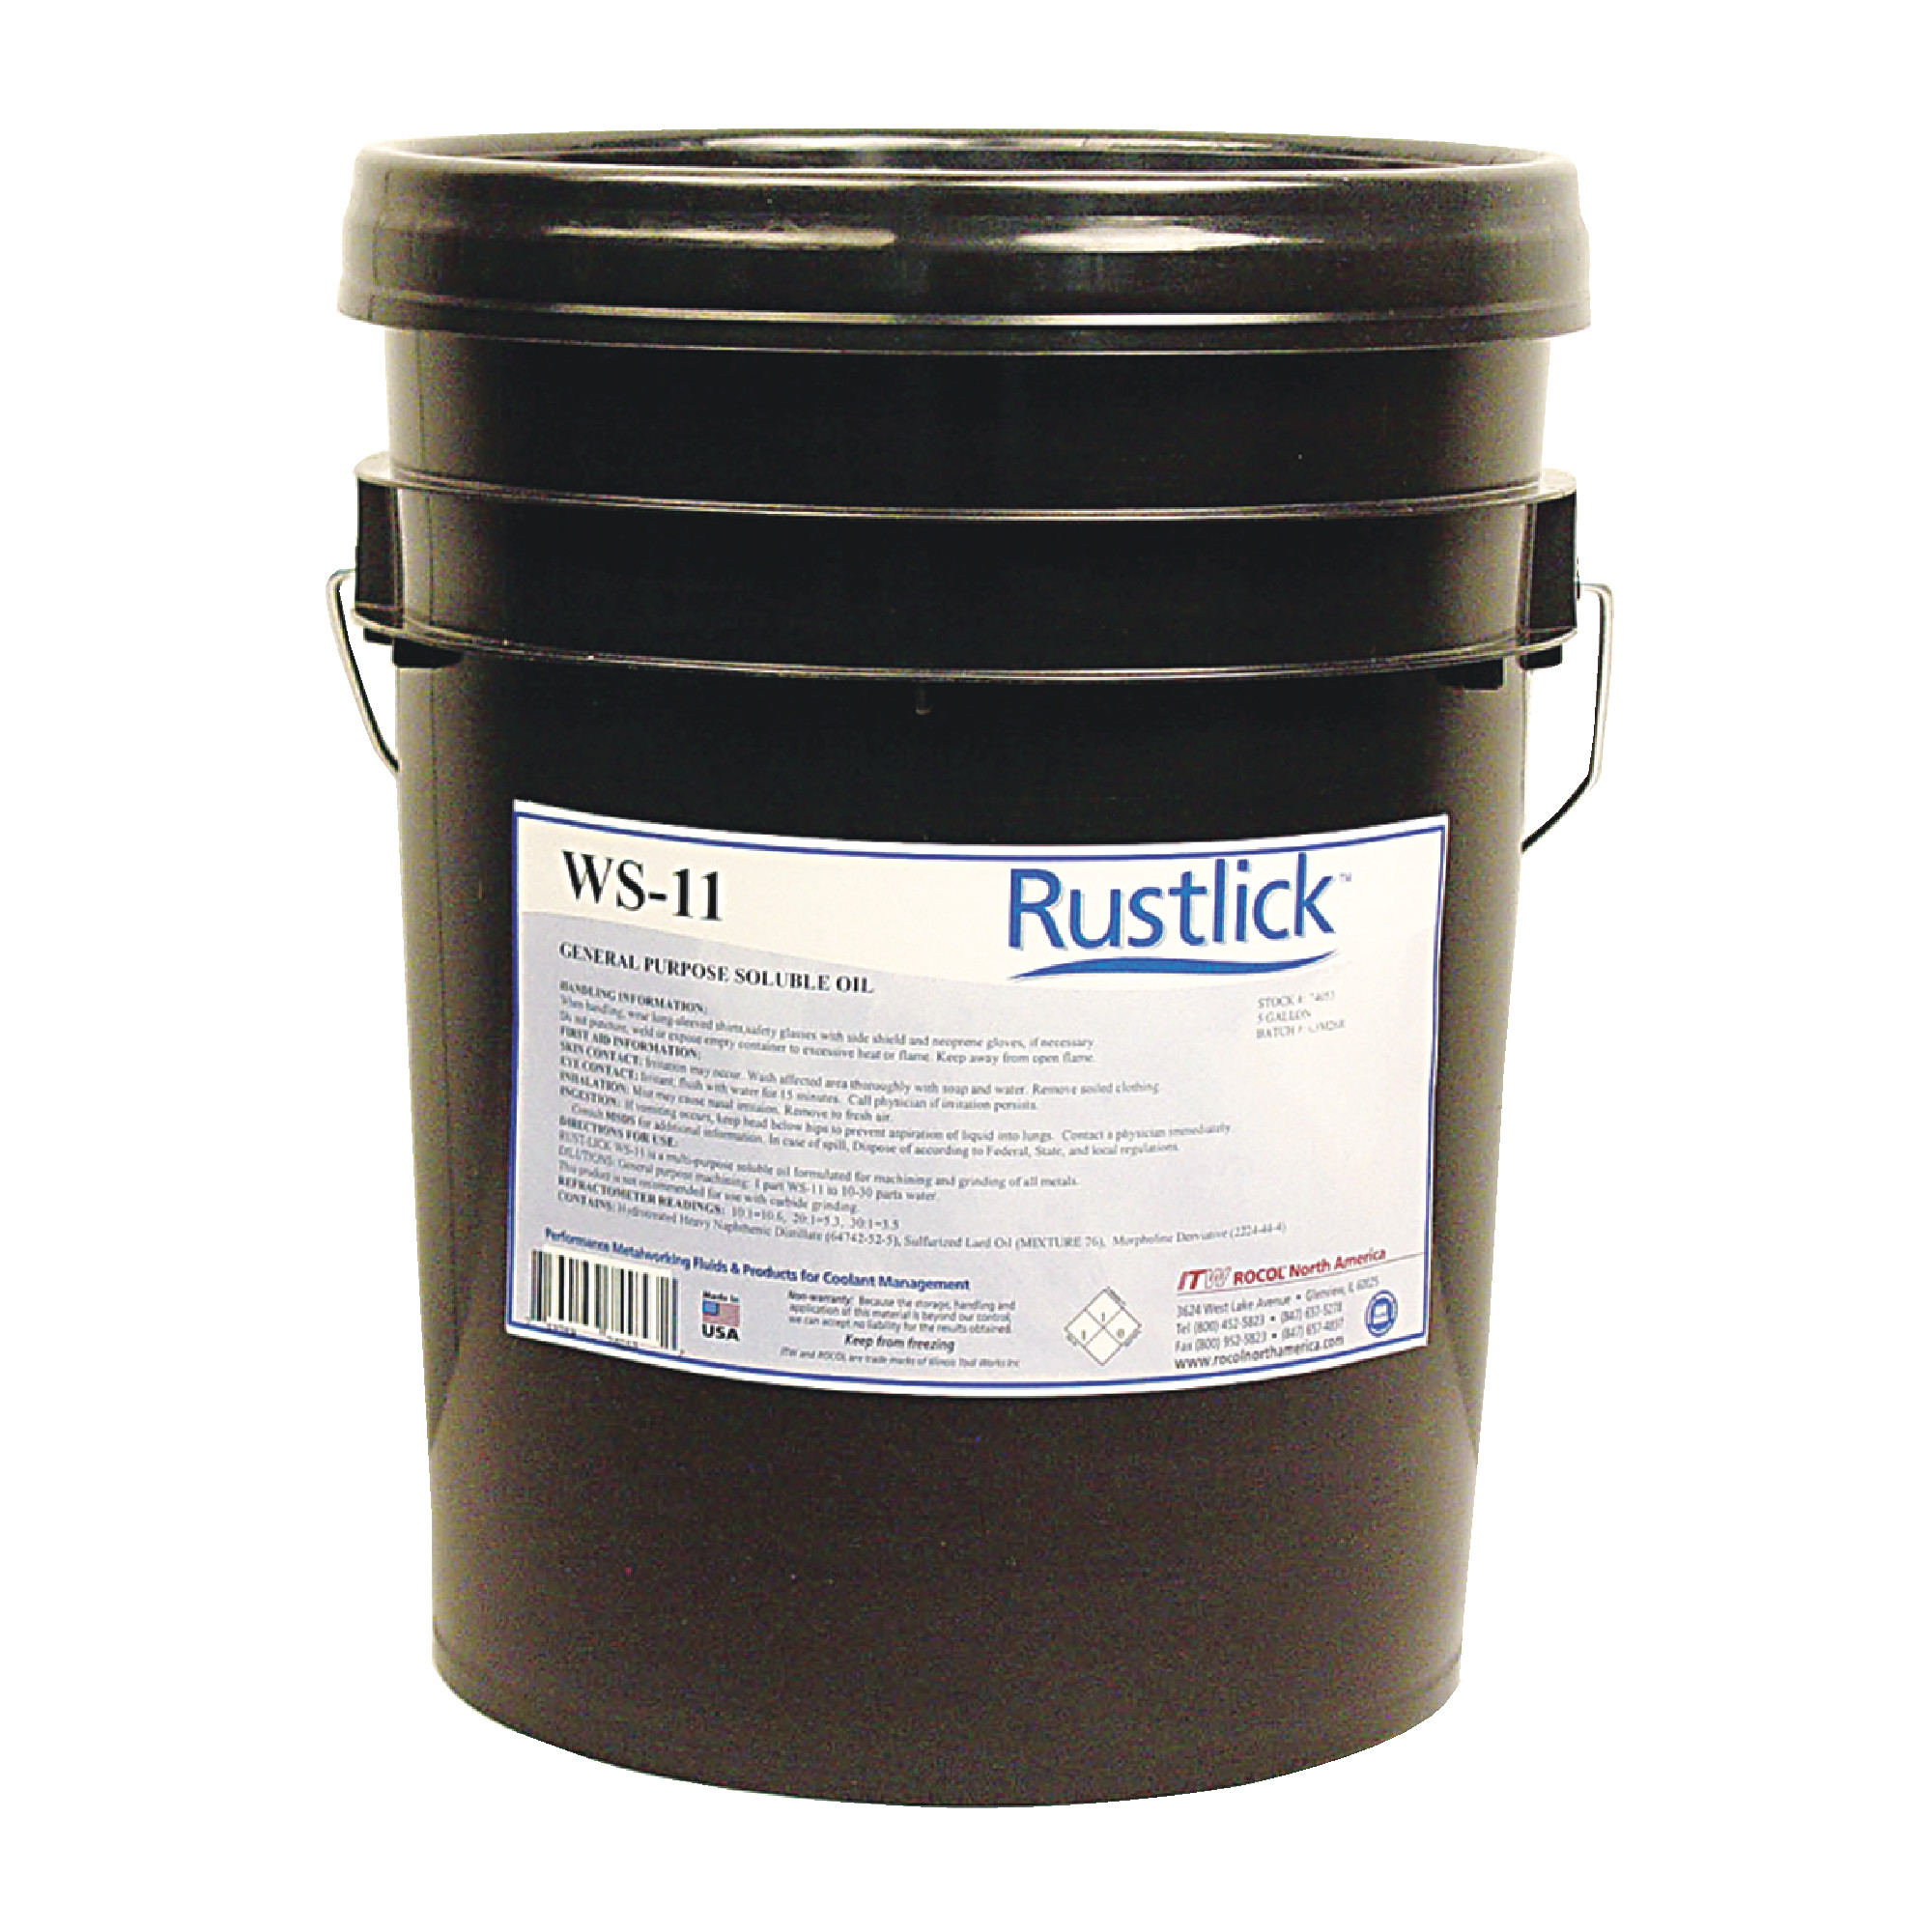 WS-11 Water Soluble Oil